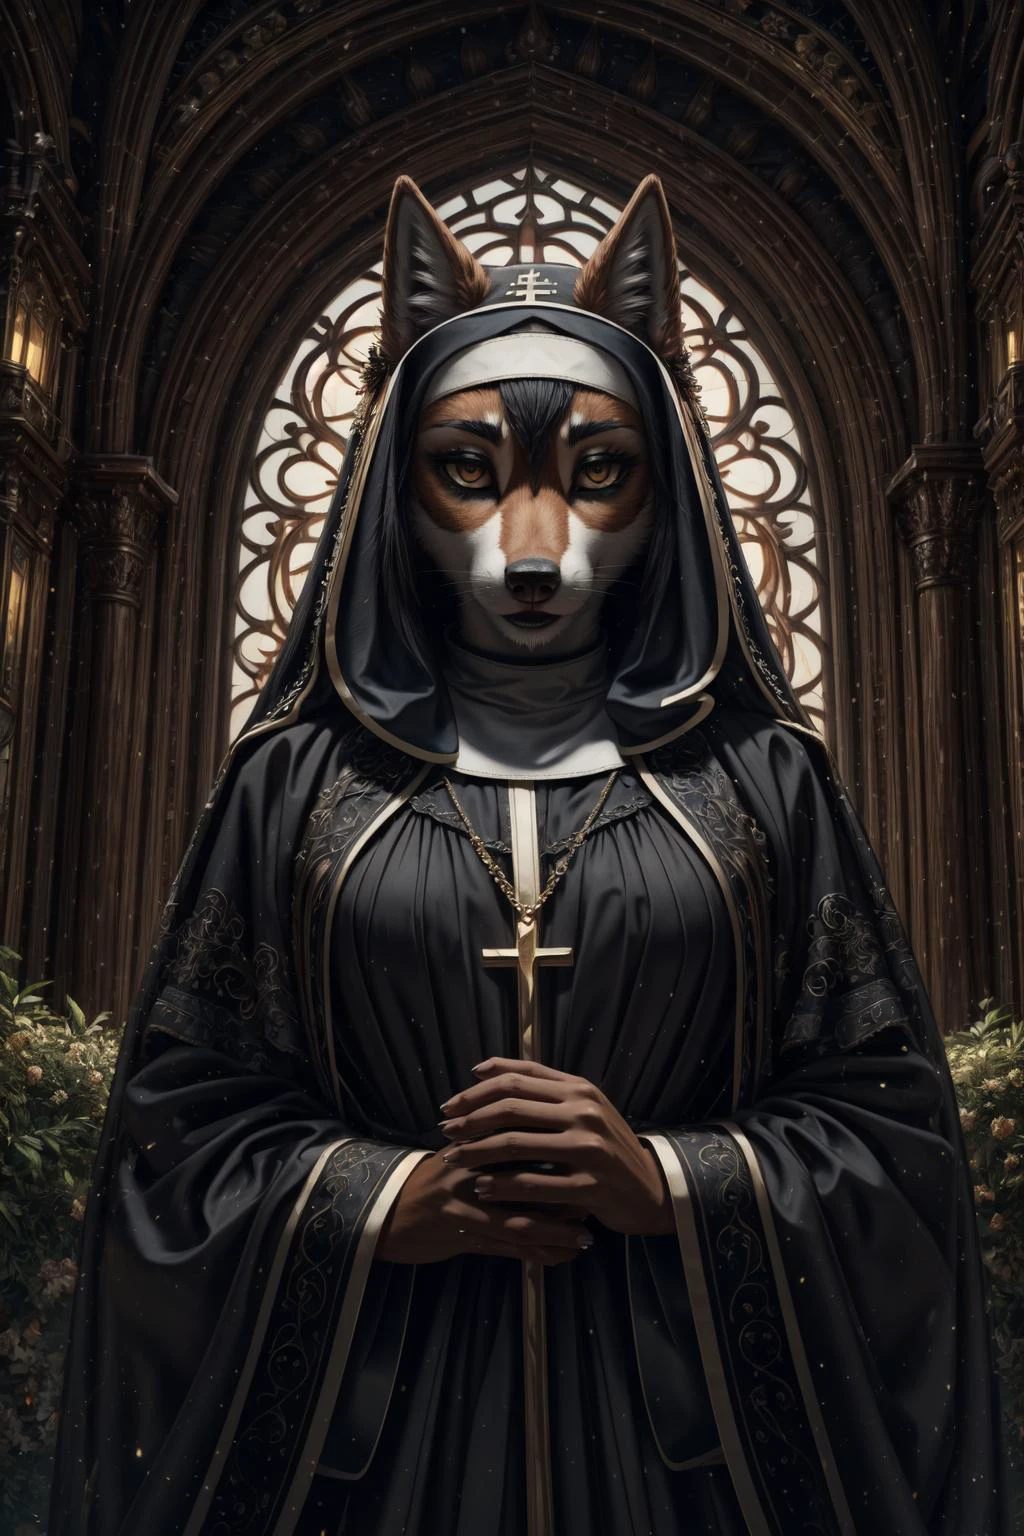 (masterpiece:1.2), (best quality:1.2), (intricate:1.2), (highly detailed:1.2), (sharp:1.2), (8k:1.2), (highres:1.2),
anthro wolf nun
cinematic lighting, vivid colors gothic, bedroomgothic